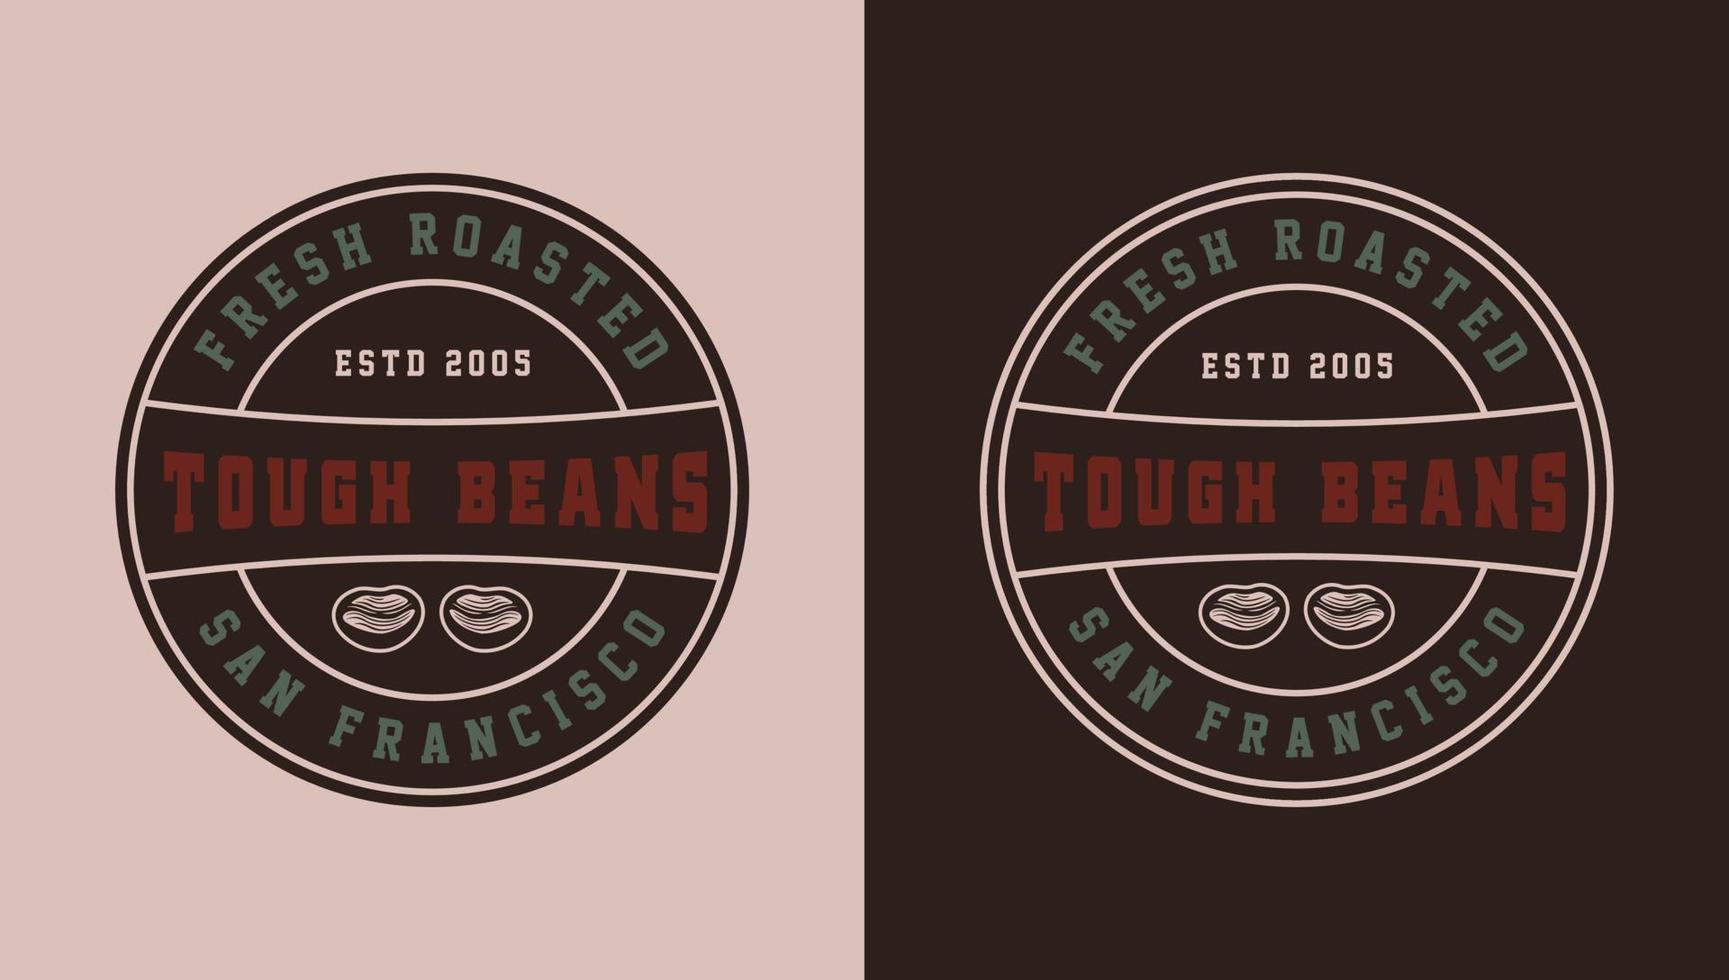 Set of vintage retro style coffee emblems, logos, badges. Can be used like poster or print. Monochrome Graphic Art. Vector Illustration. Detailed woodcut style design.